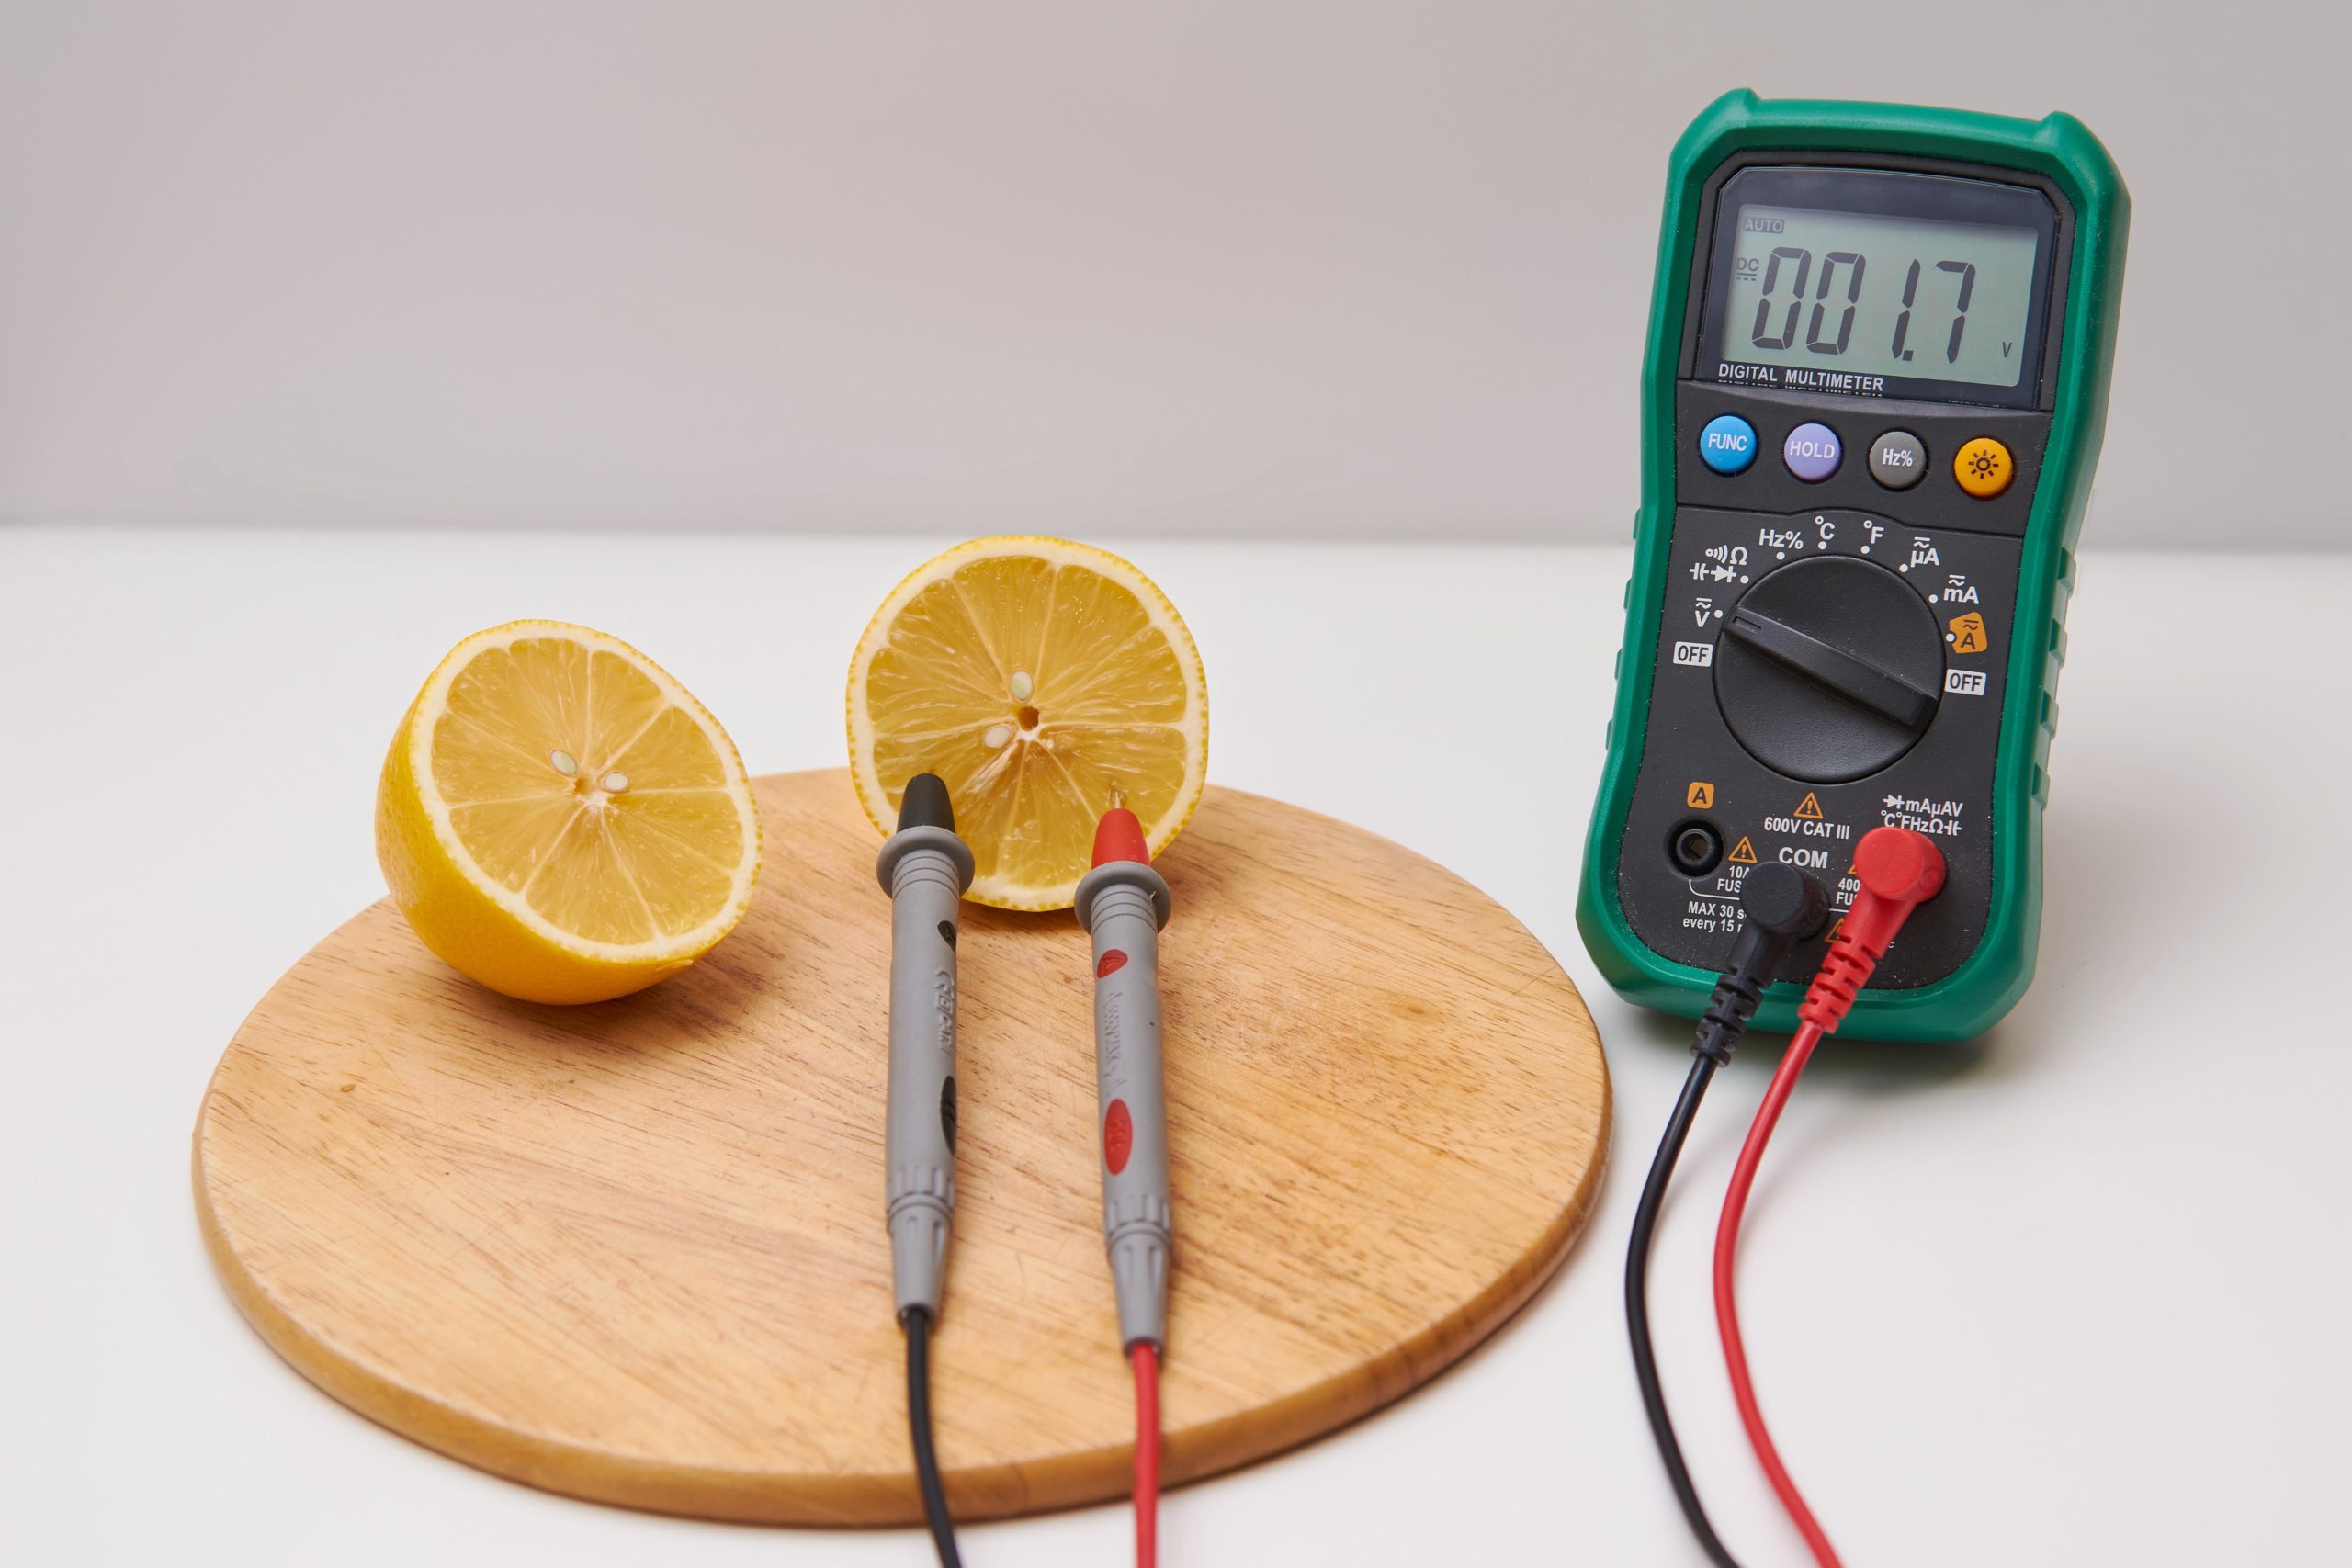 A digital multimeter displays a voltage reading from a lemon battery experiment, with two halves of a lemon connected by probes on a wooden cutting board, demonstrating an educational example of generating electricity from citrus fruit.